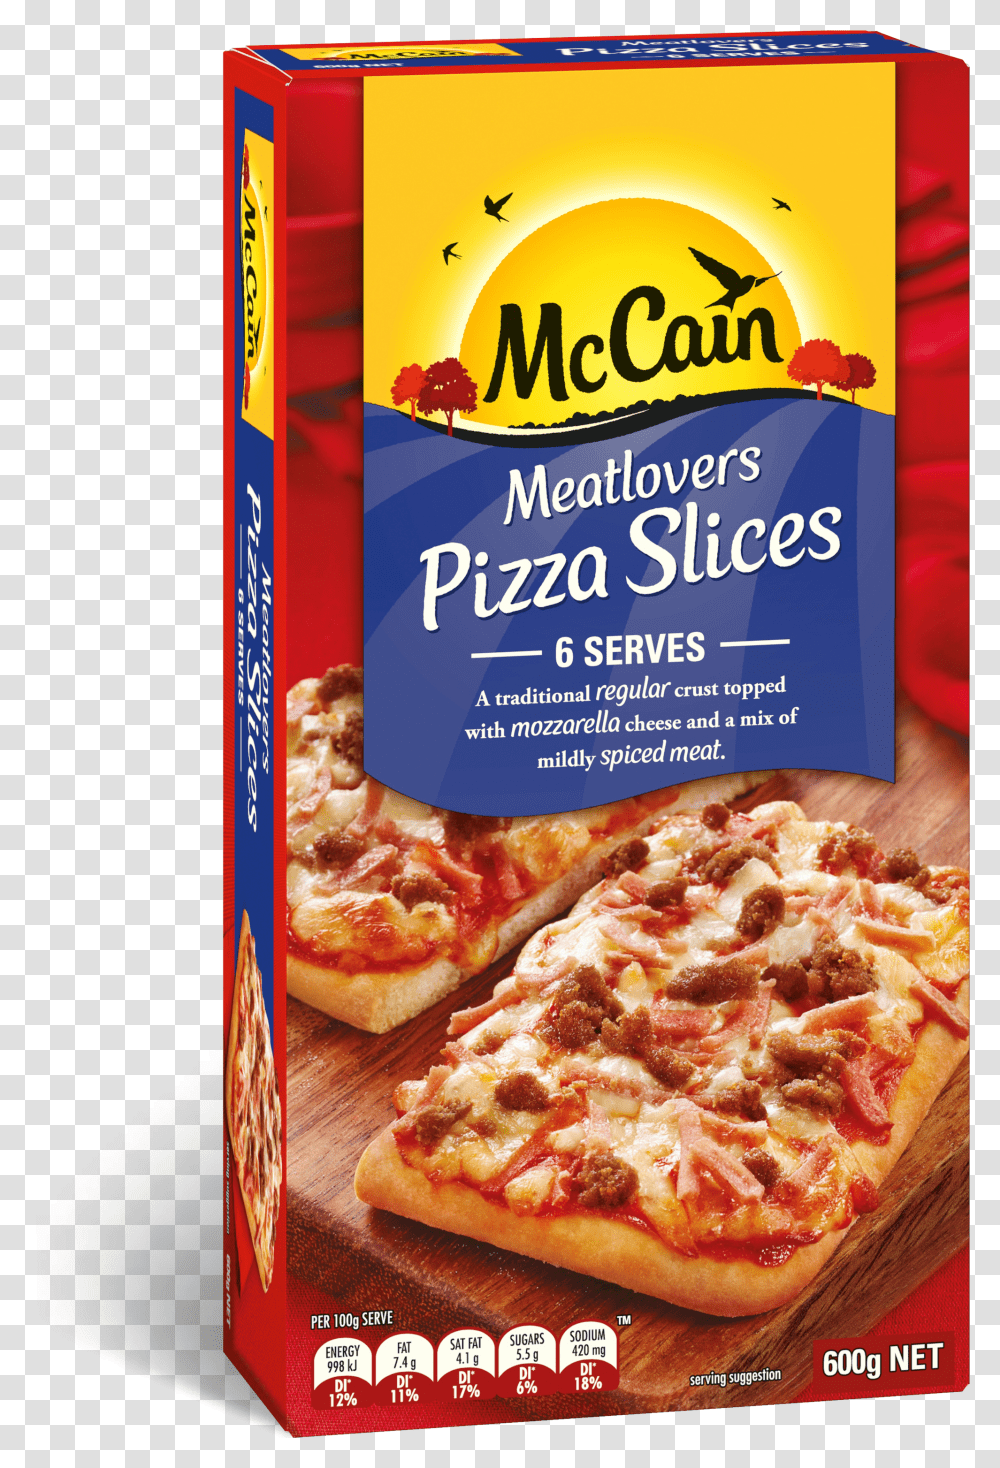 Meatlovers Pizza Slices 600g Full Size Download Seekpng Meat Lovers Pizza Slices Transparent Png